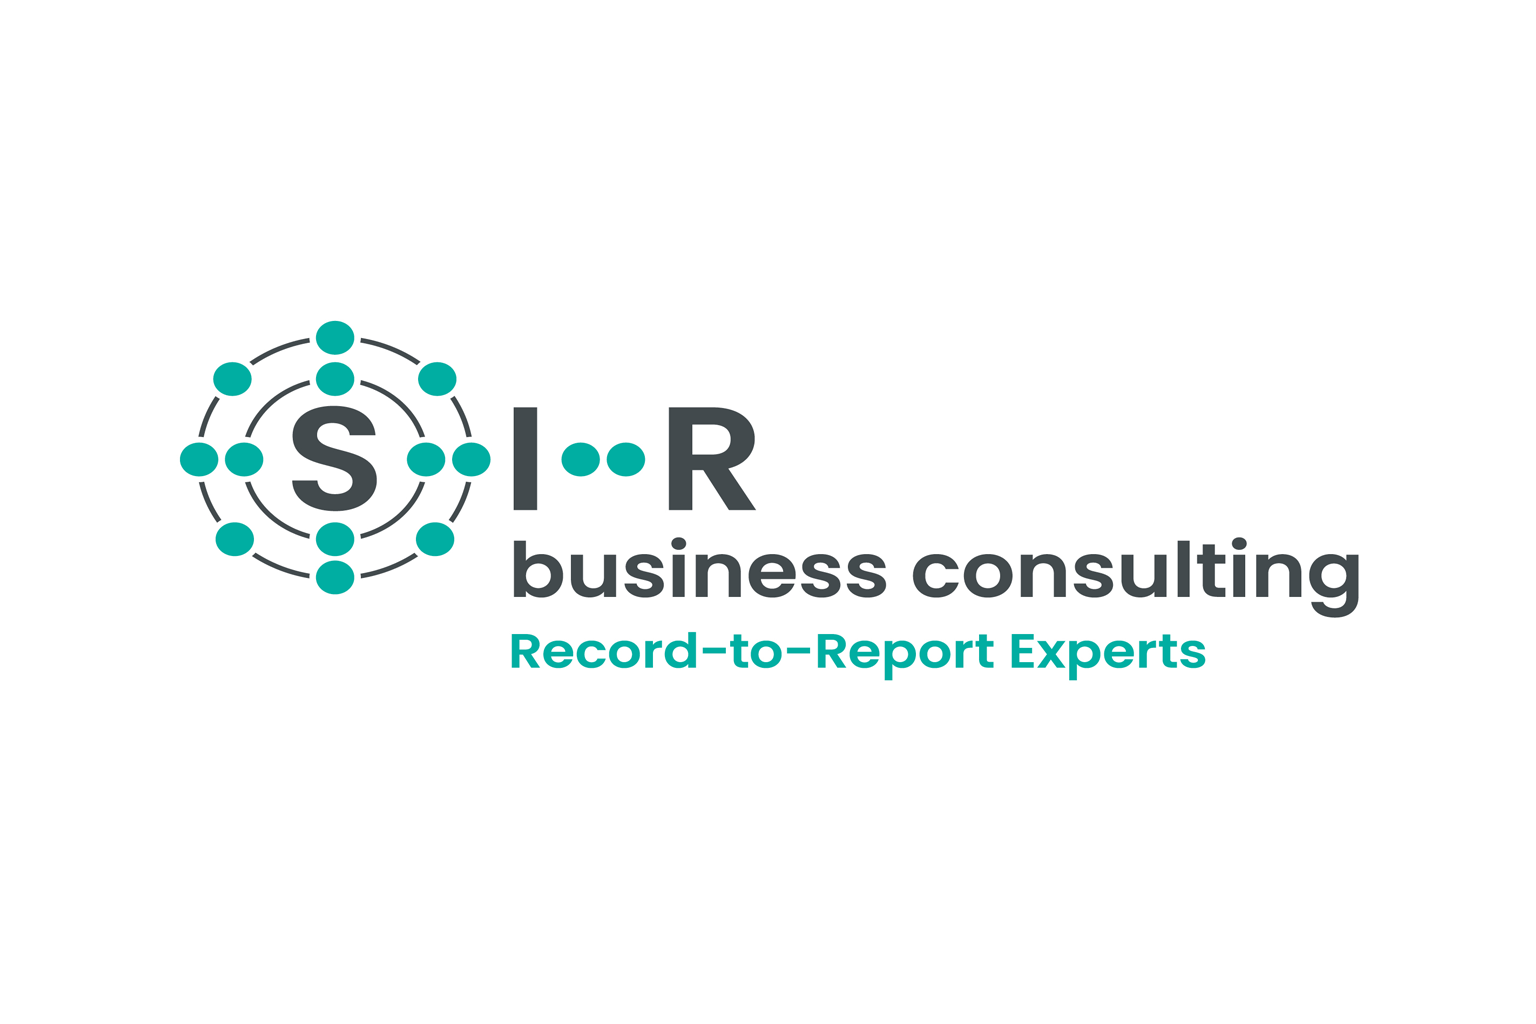 SIR business consulting